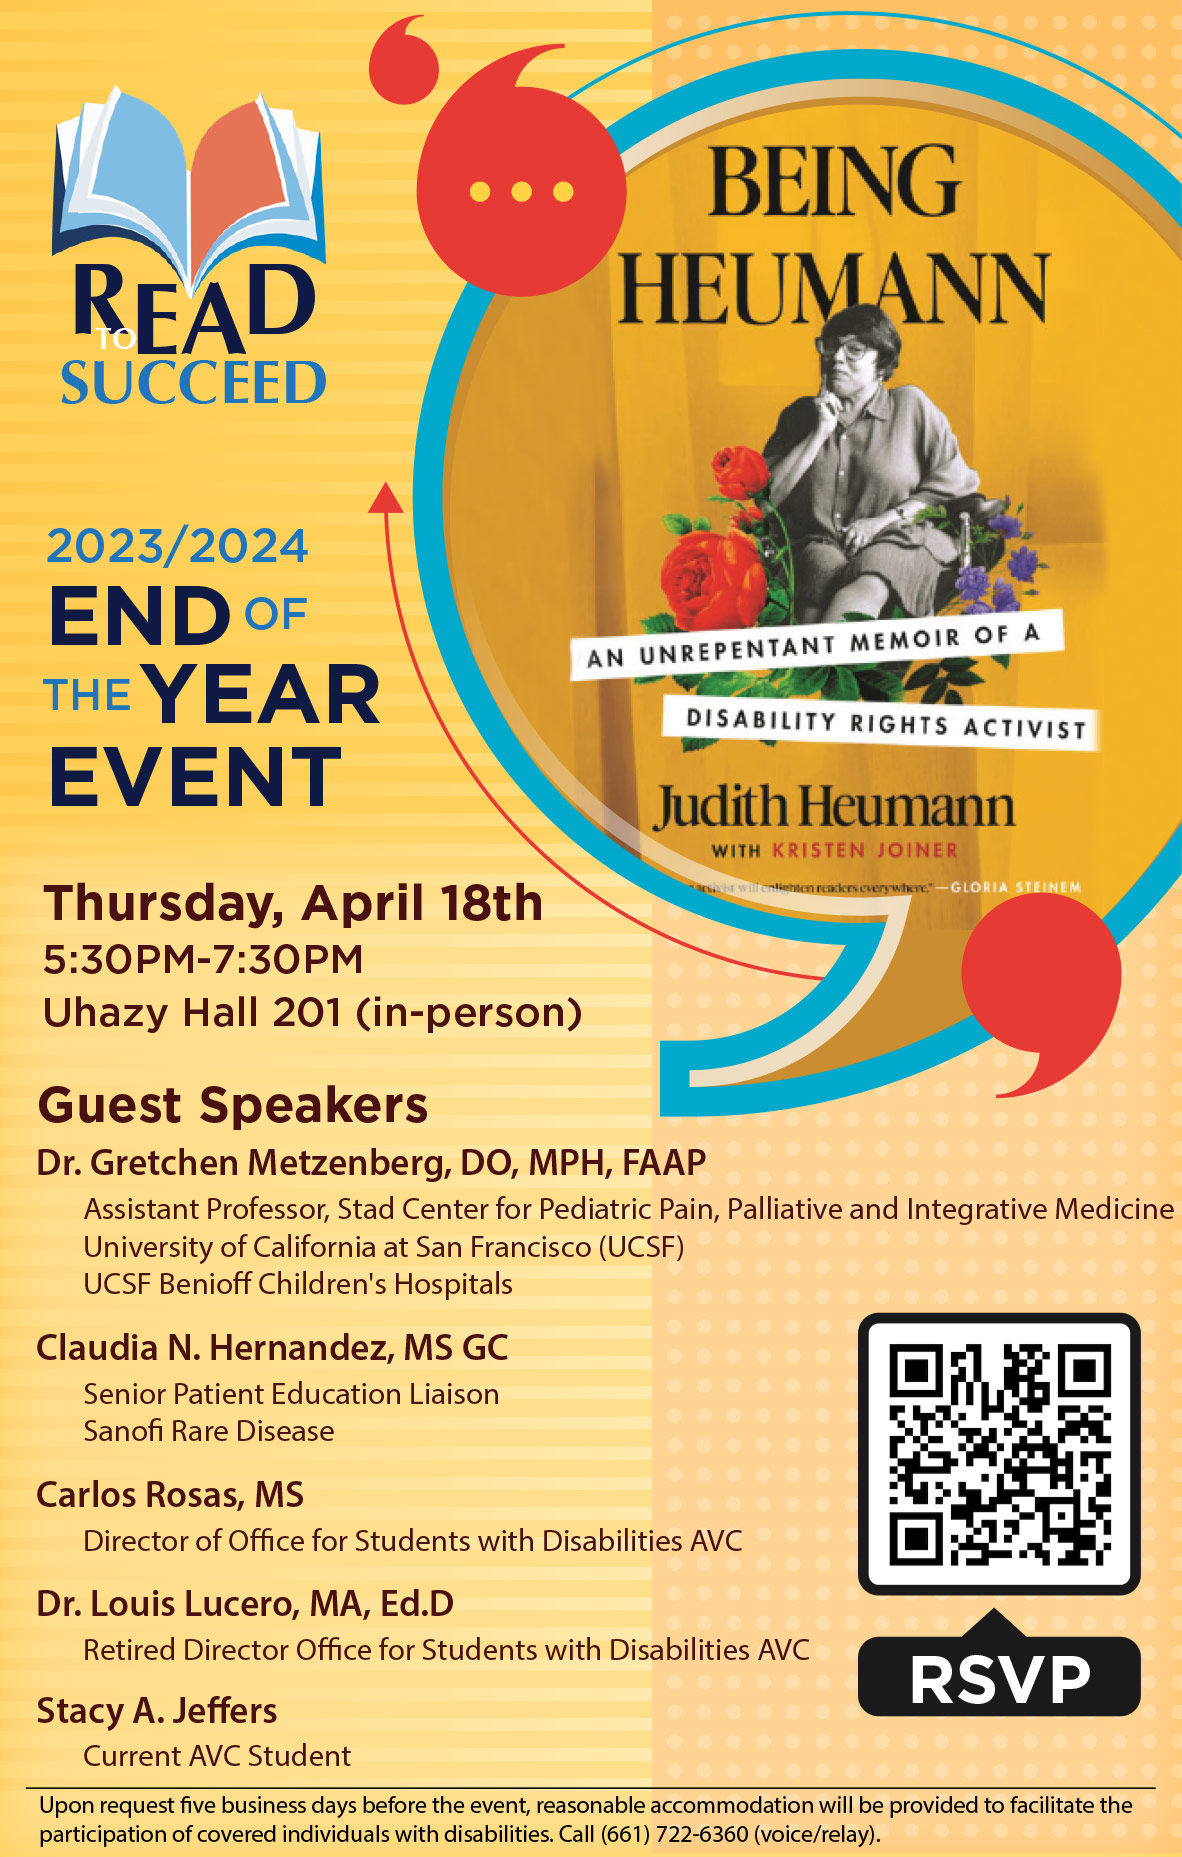 Read to Succeed 2023-2024 End of the Year Event on Thursday, April 18 from 5:30 to 7:30 p.m. in Uhazy Hall 201 (in-person). Guest Speakers: Dr. Gretchen Metzenberg, DO, MPH, FAAP, Claudia N. Hernandez, MS GC, Carlos Rosas, MS, Dr. Louis Lucero, MA, Ed.D and Stacy A. Jeffers. Upon request five business days before the event, reasonable accommodation will be provided to facilitate the participation of covered individuals with disabilities. Call (661) 722-6360 (voice/relay). RSVP for Being Heumann by Judith Heumann Final Event.